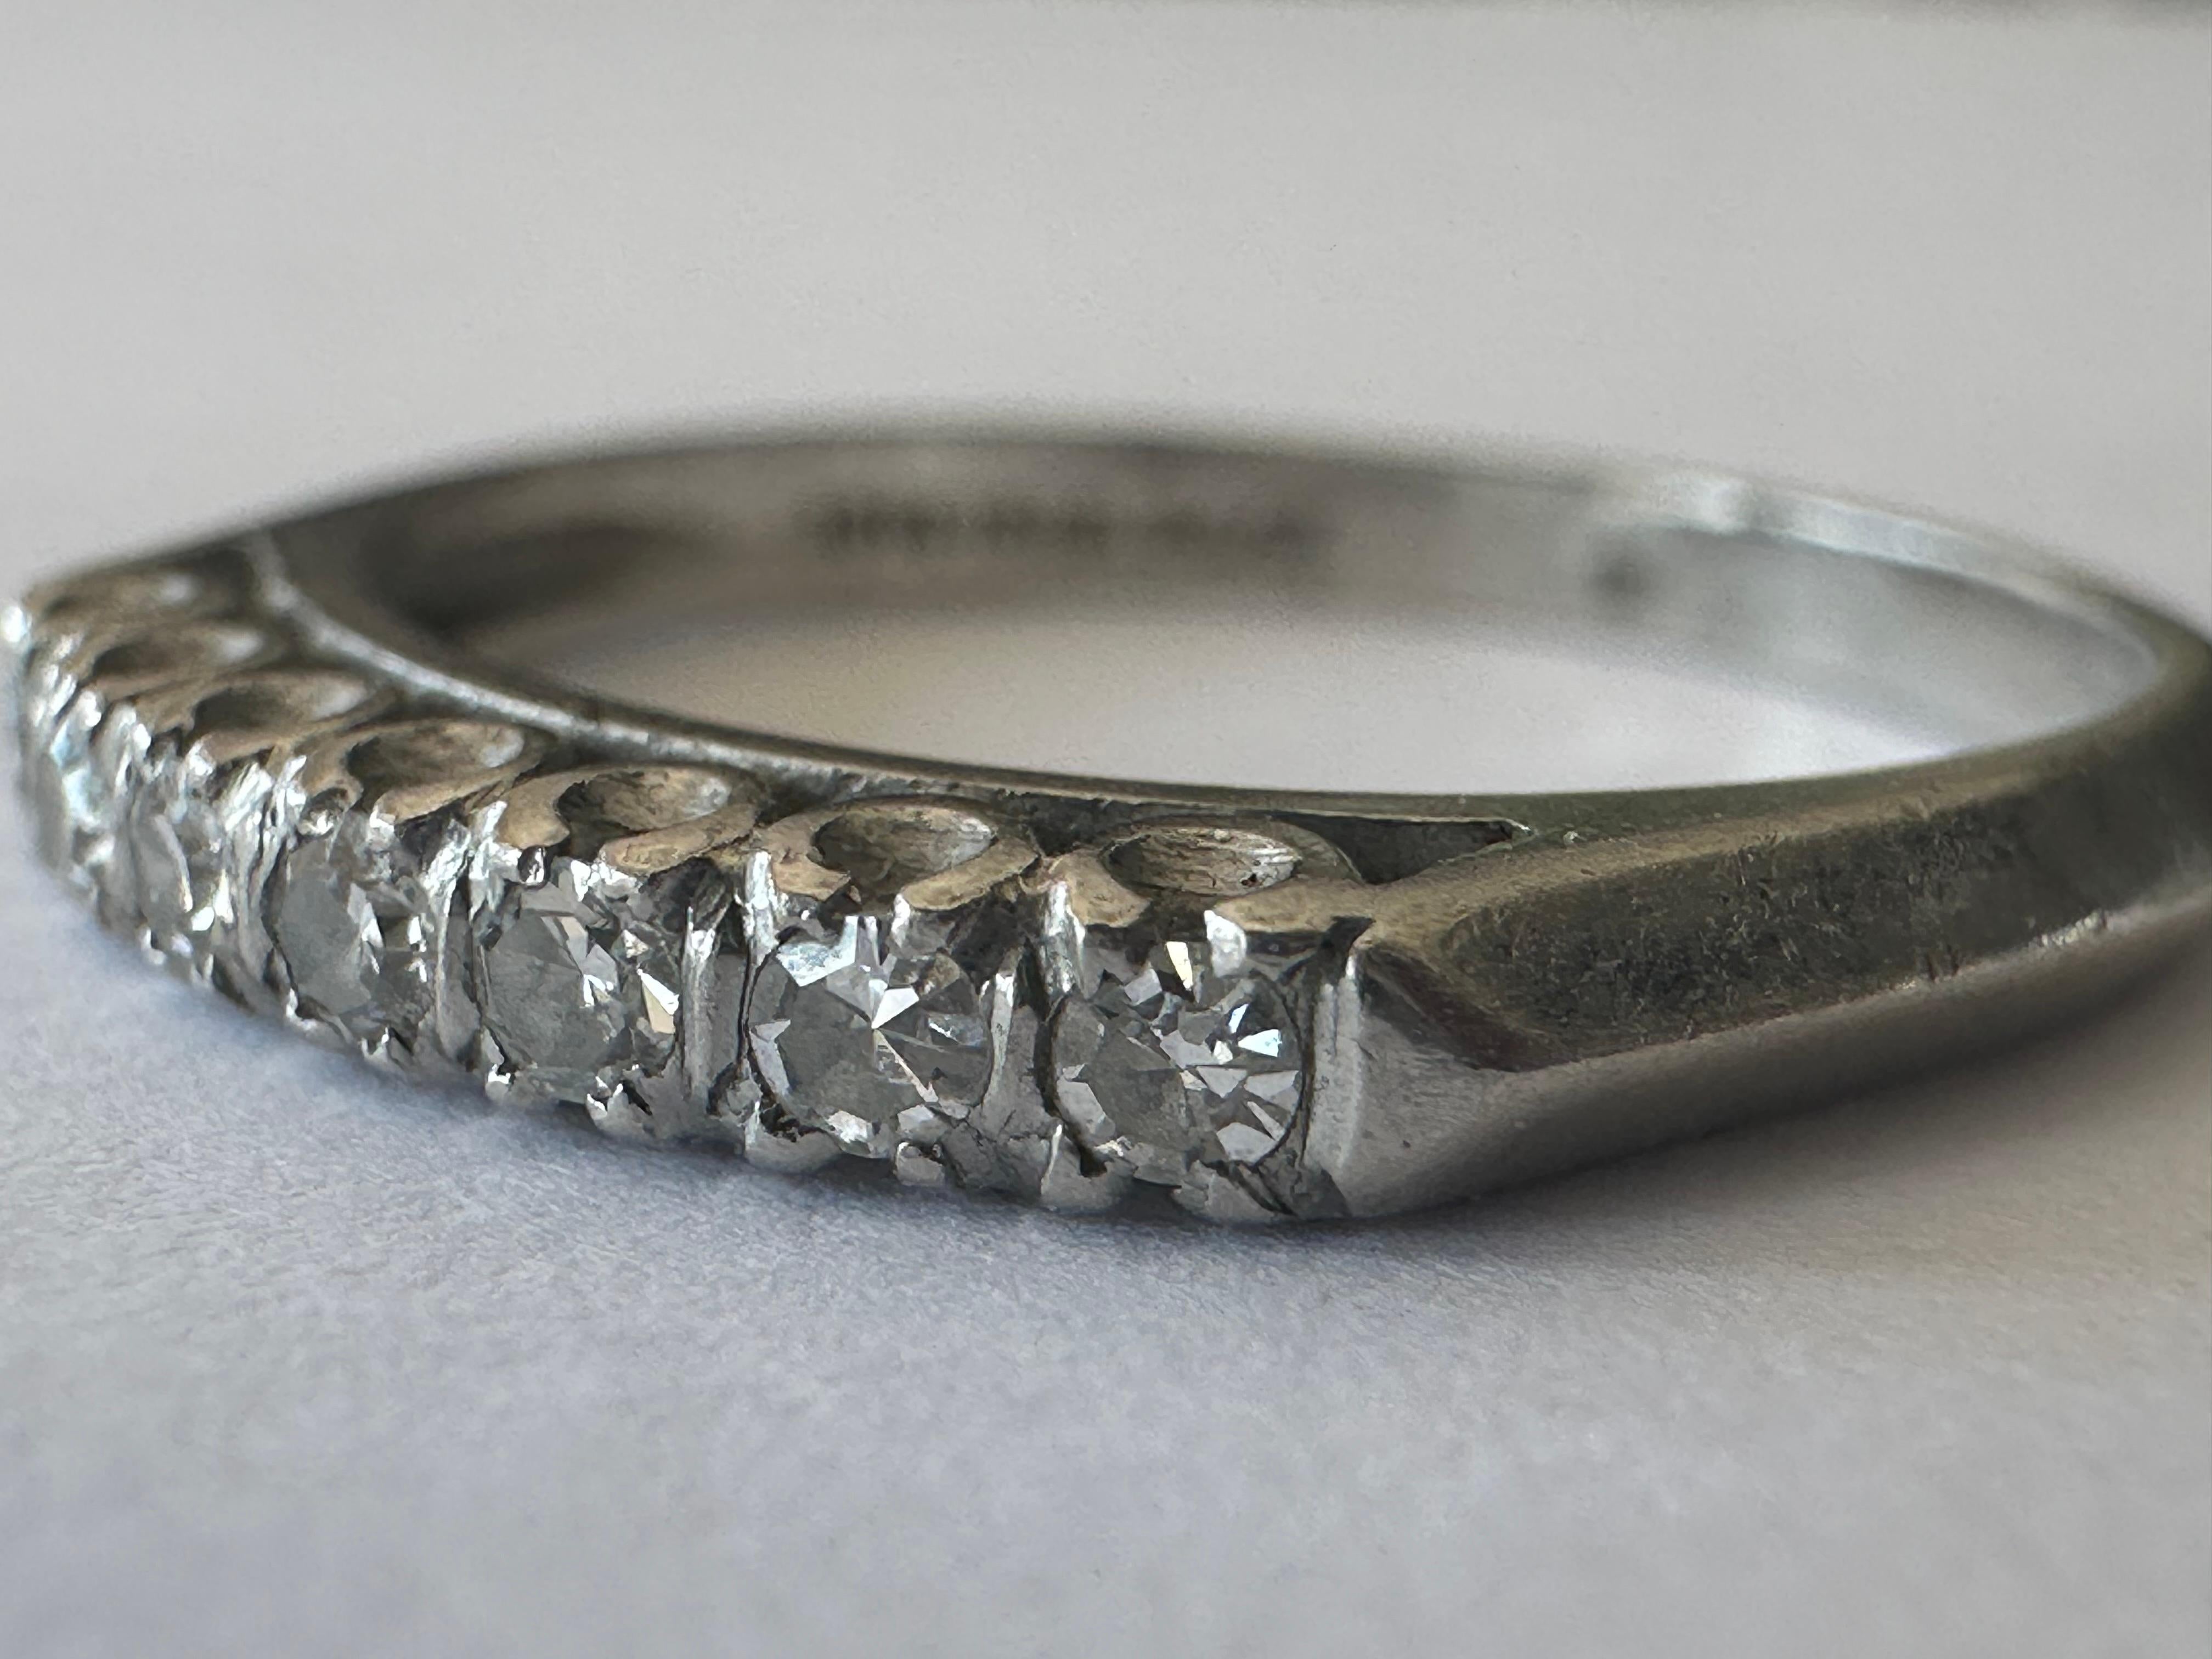 Seven single-cut diamonds totaling approximately 0.14 carat, F color VS clarity, shimmer across the top of this classic Art Deco band handcrafted in platinum. The width of the top of the band measures 2.4mm.